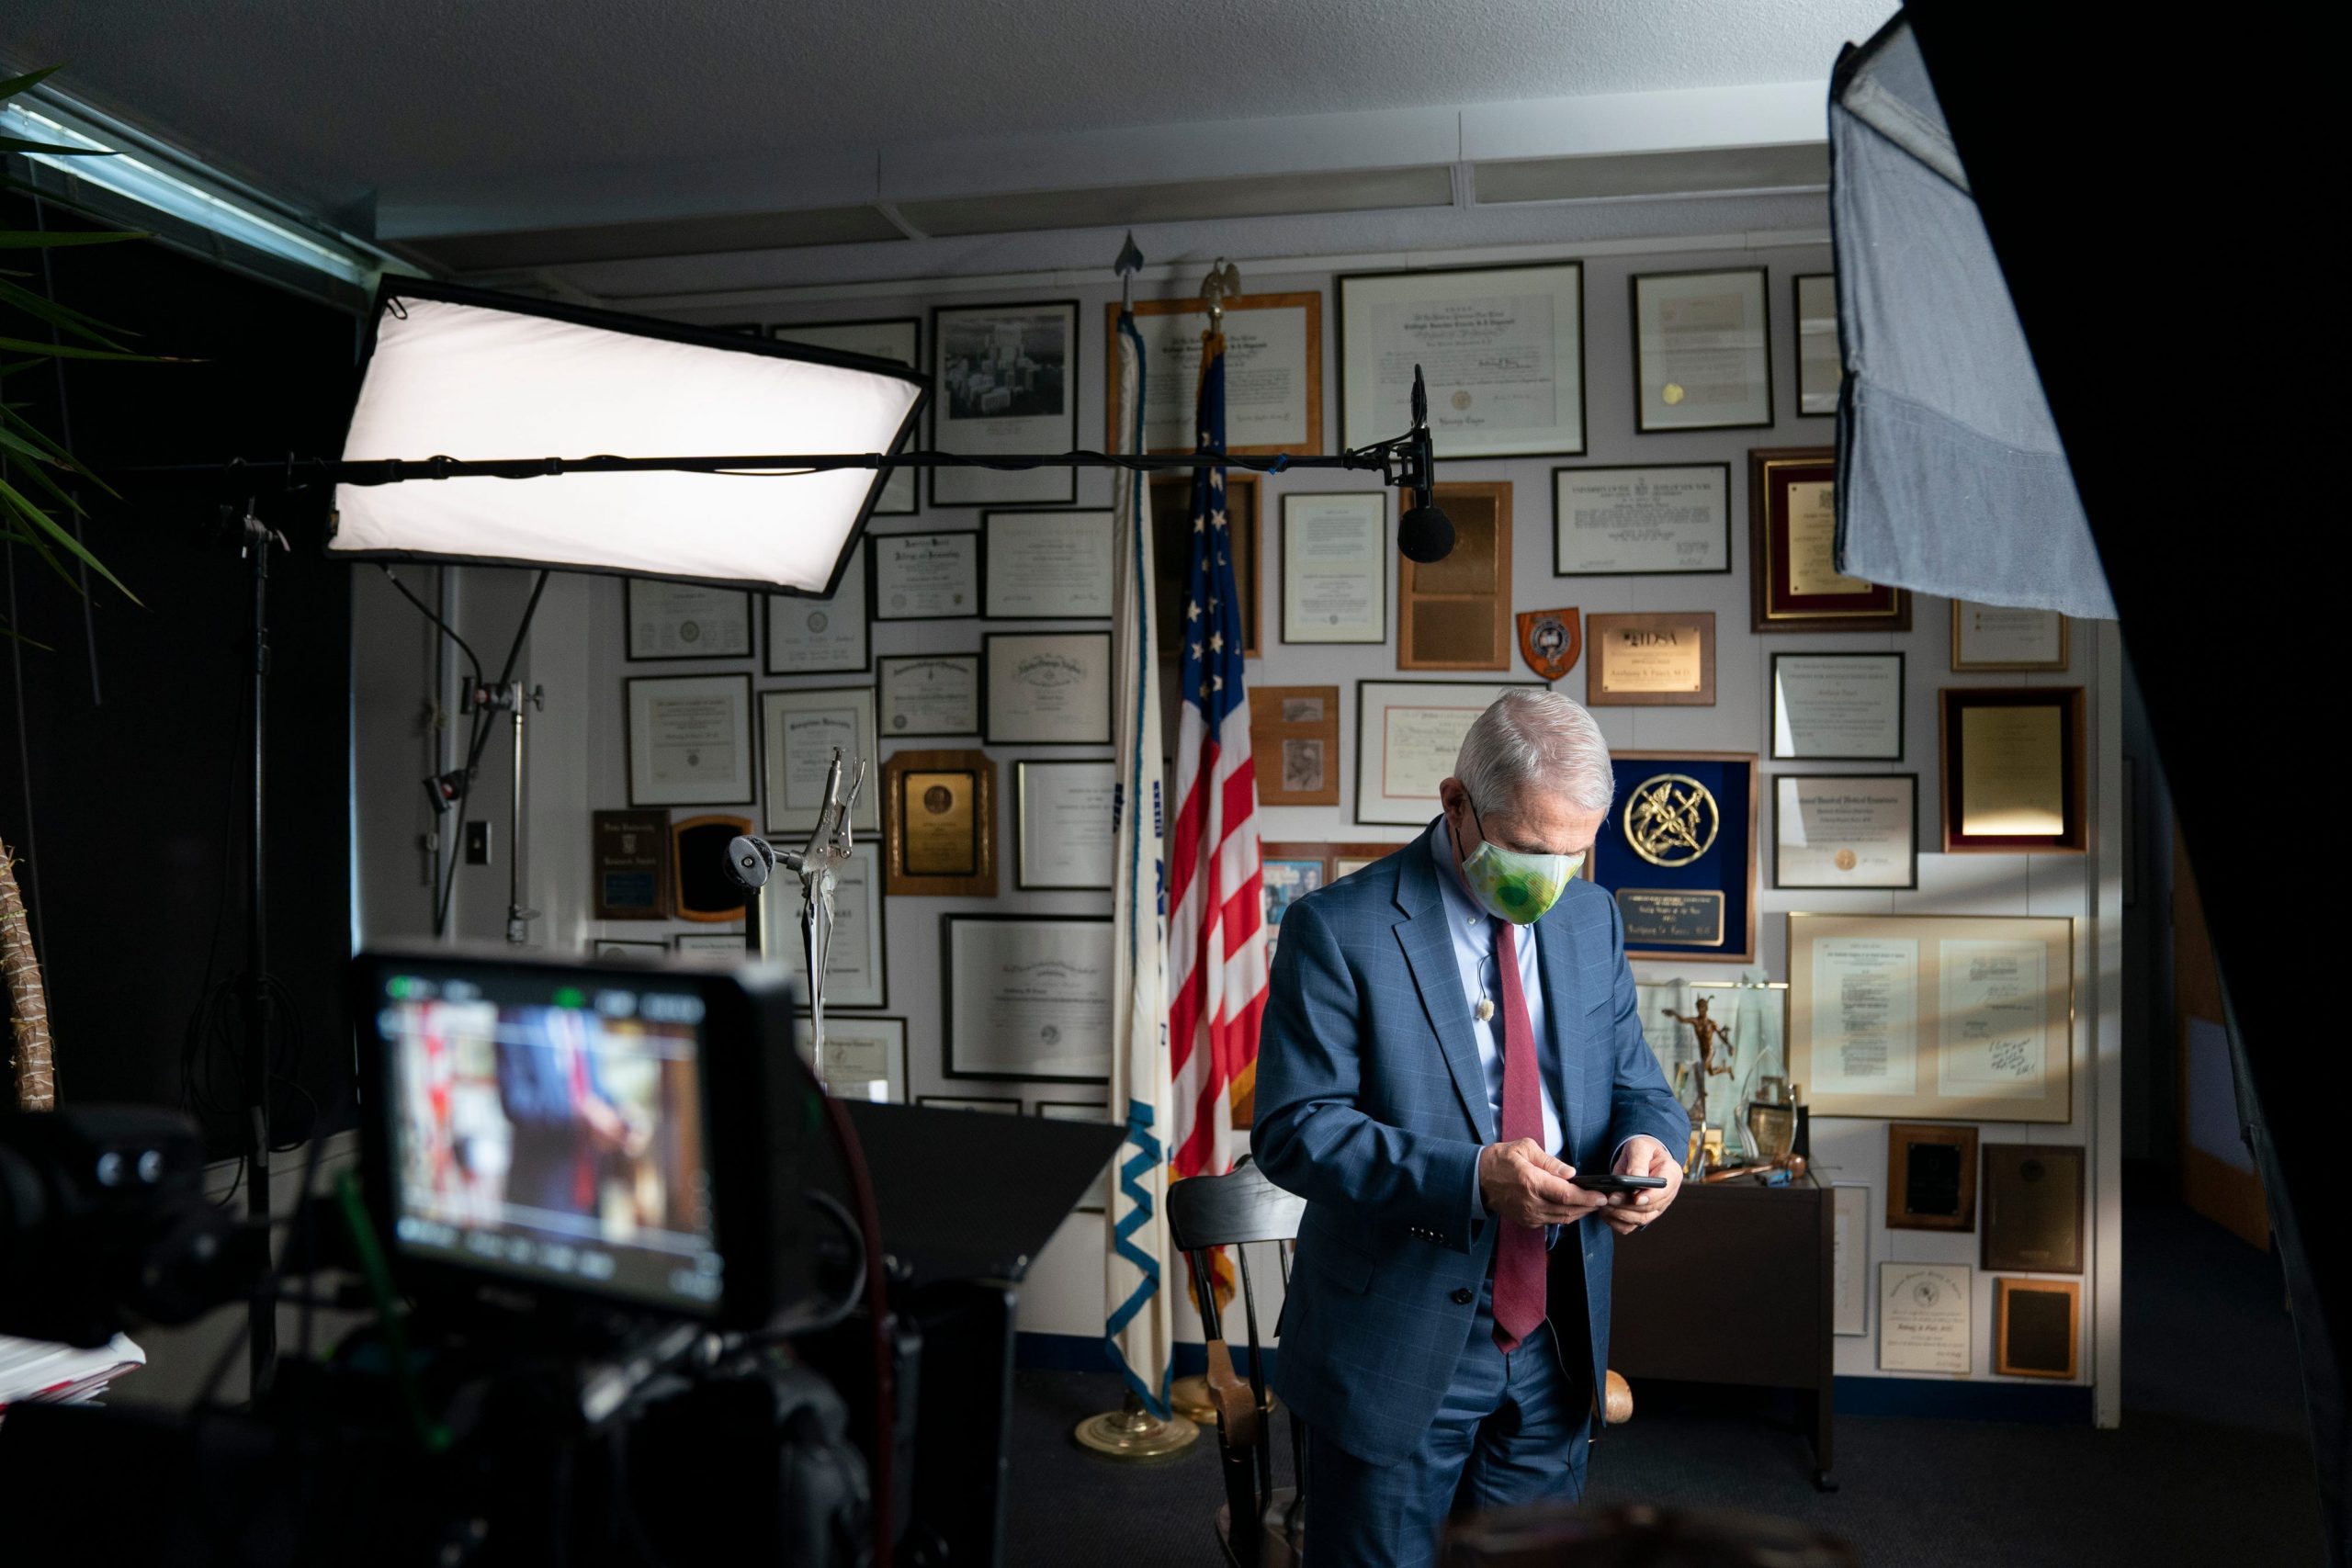 Dr. Anthony Fauci during an interview at the NIH in Bethesda, Maryland.